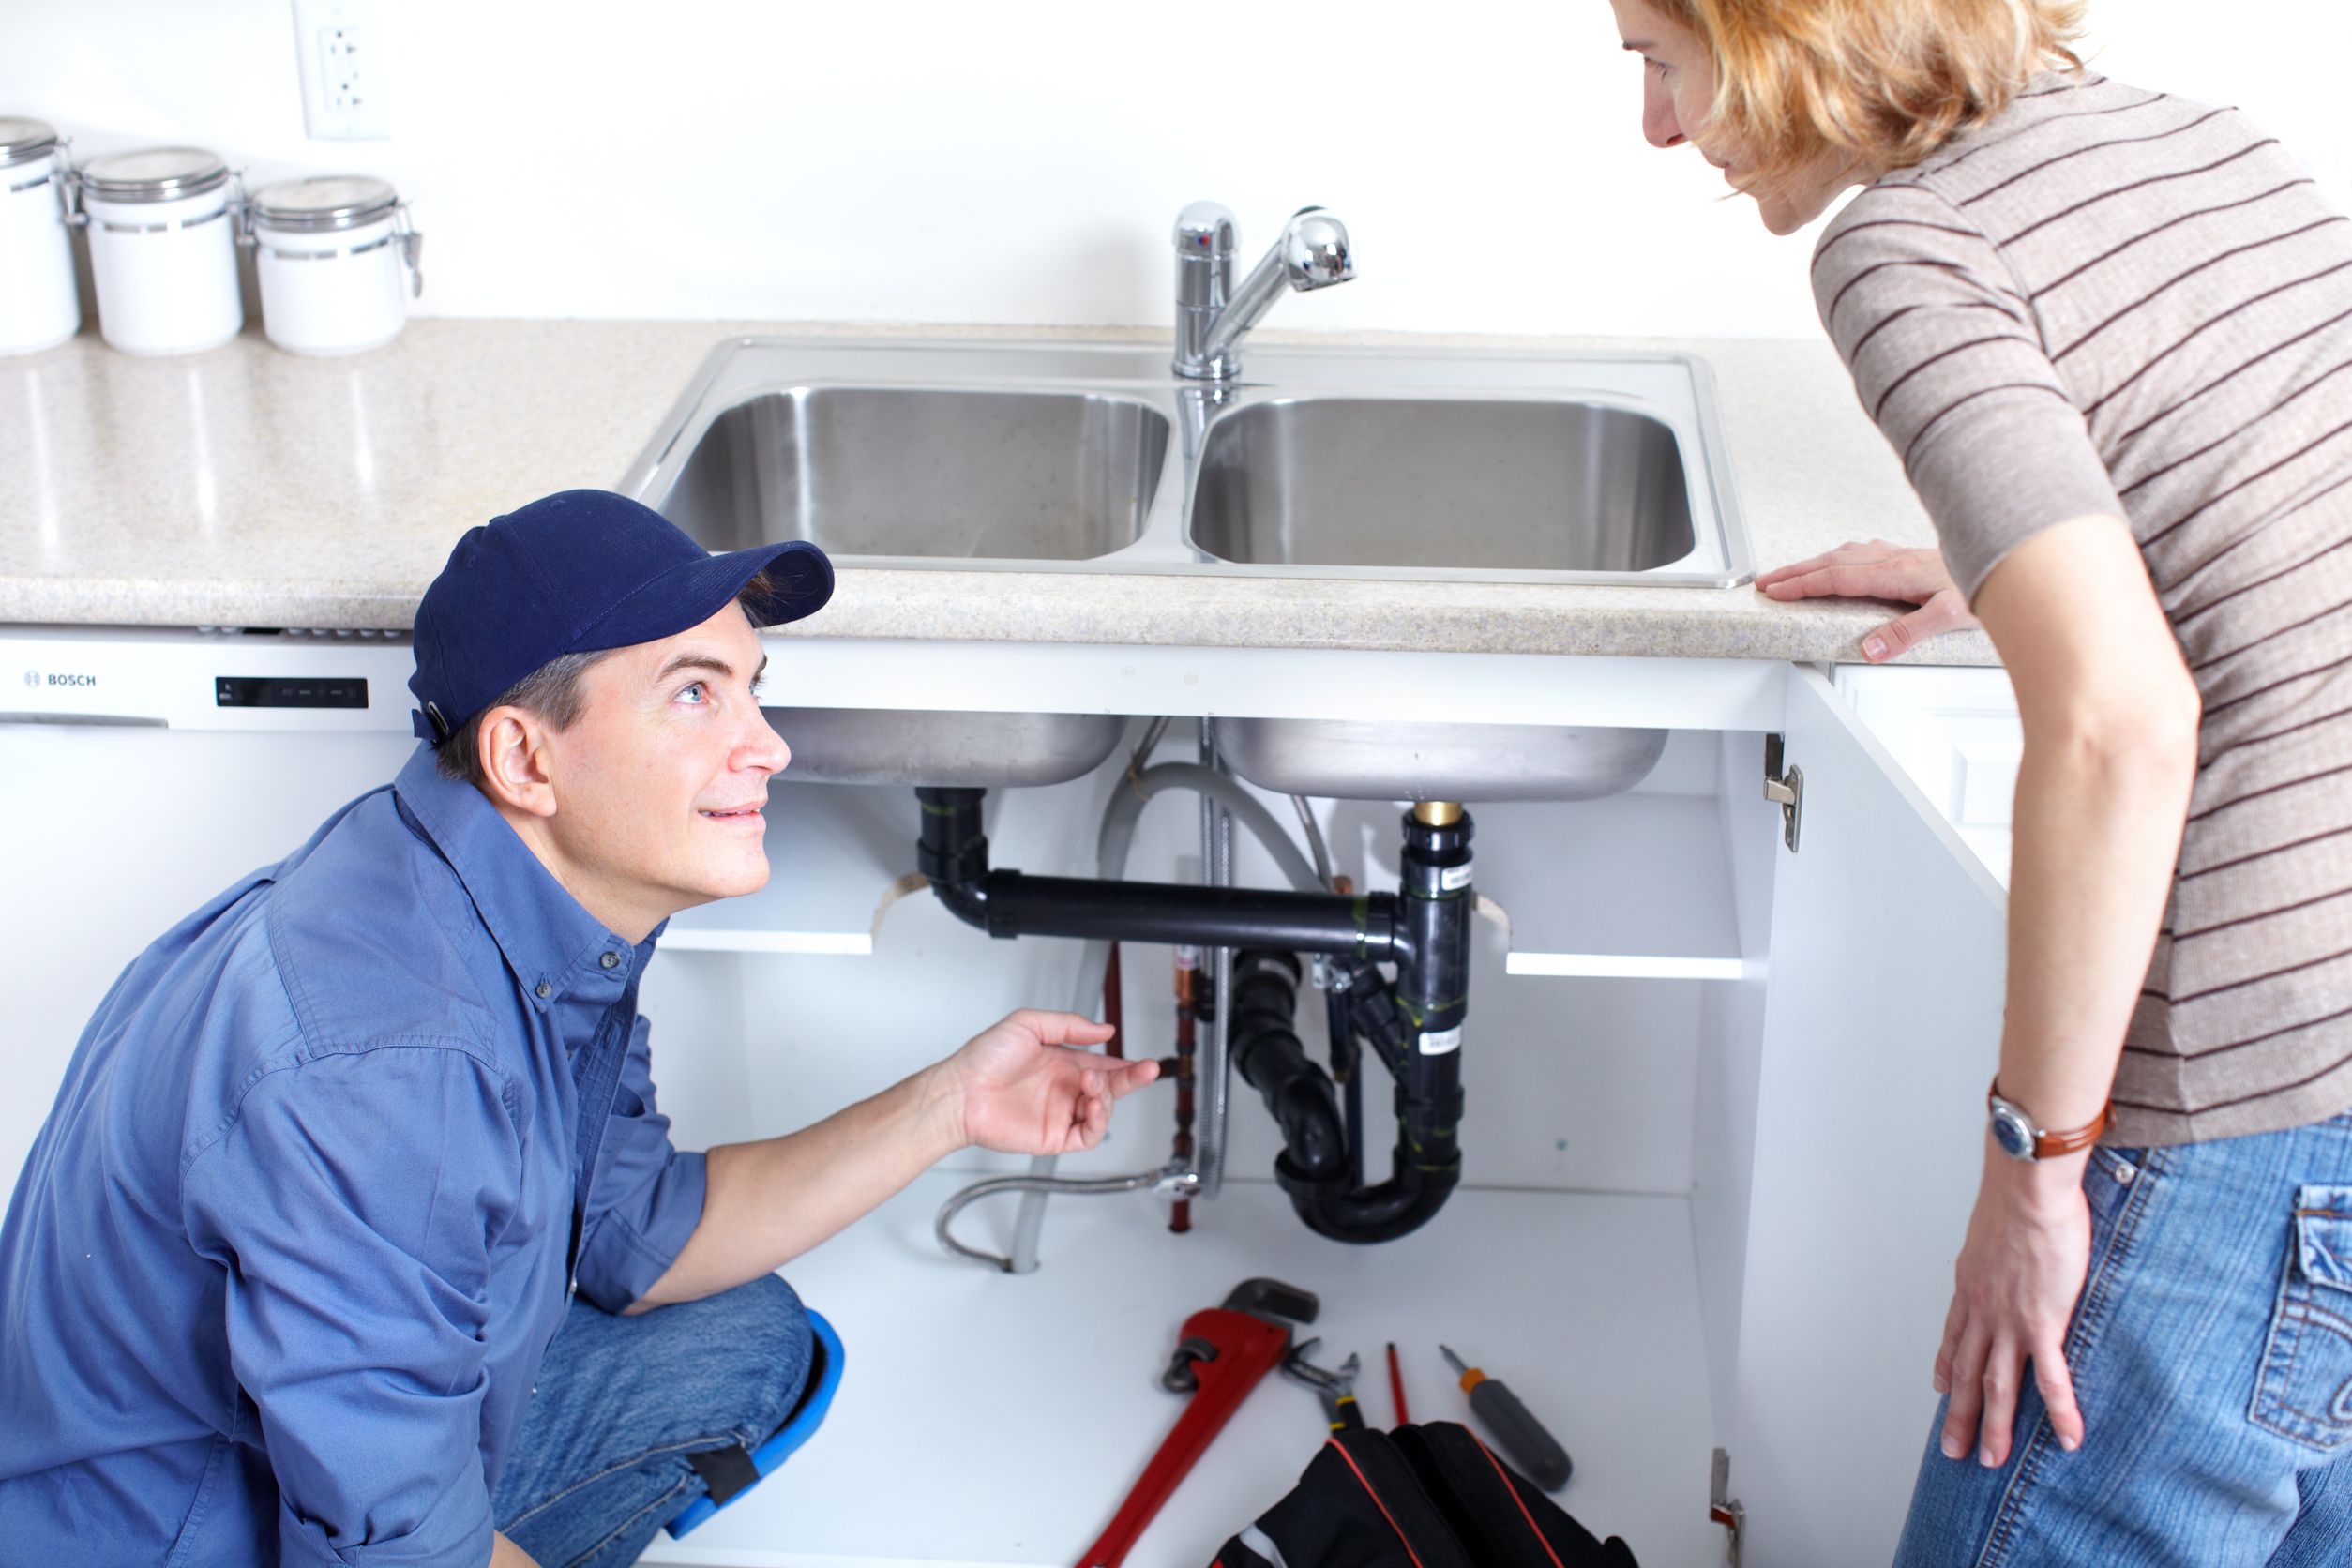 Common Plumbing Issues Resolved by Plumbing Services